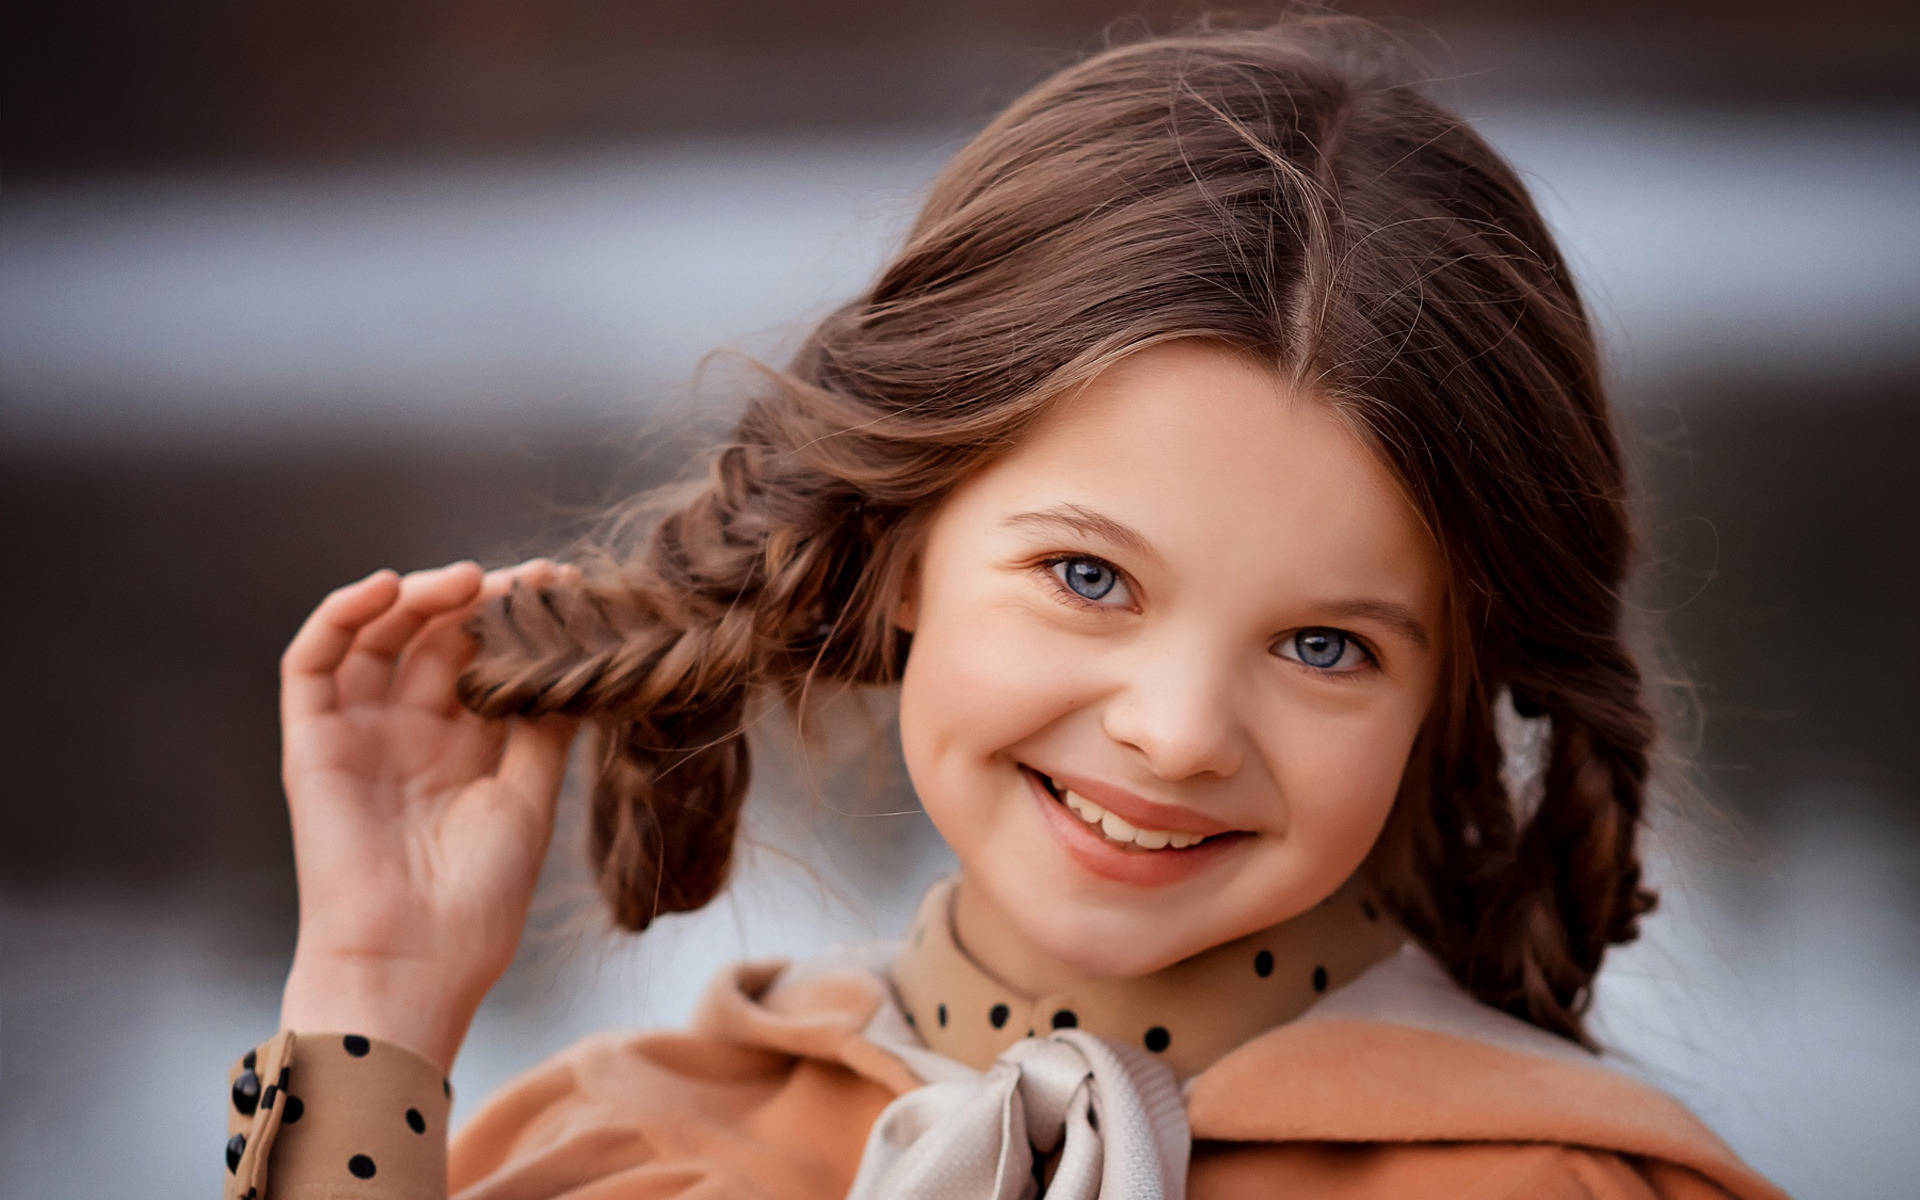 Cute Girl With Braided Hair Background